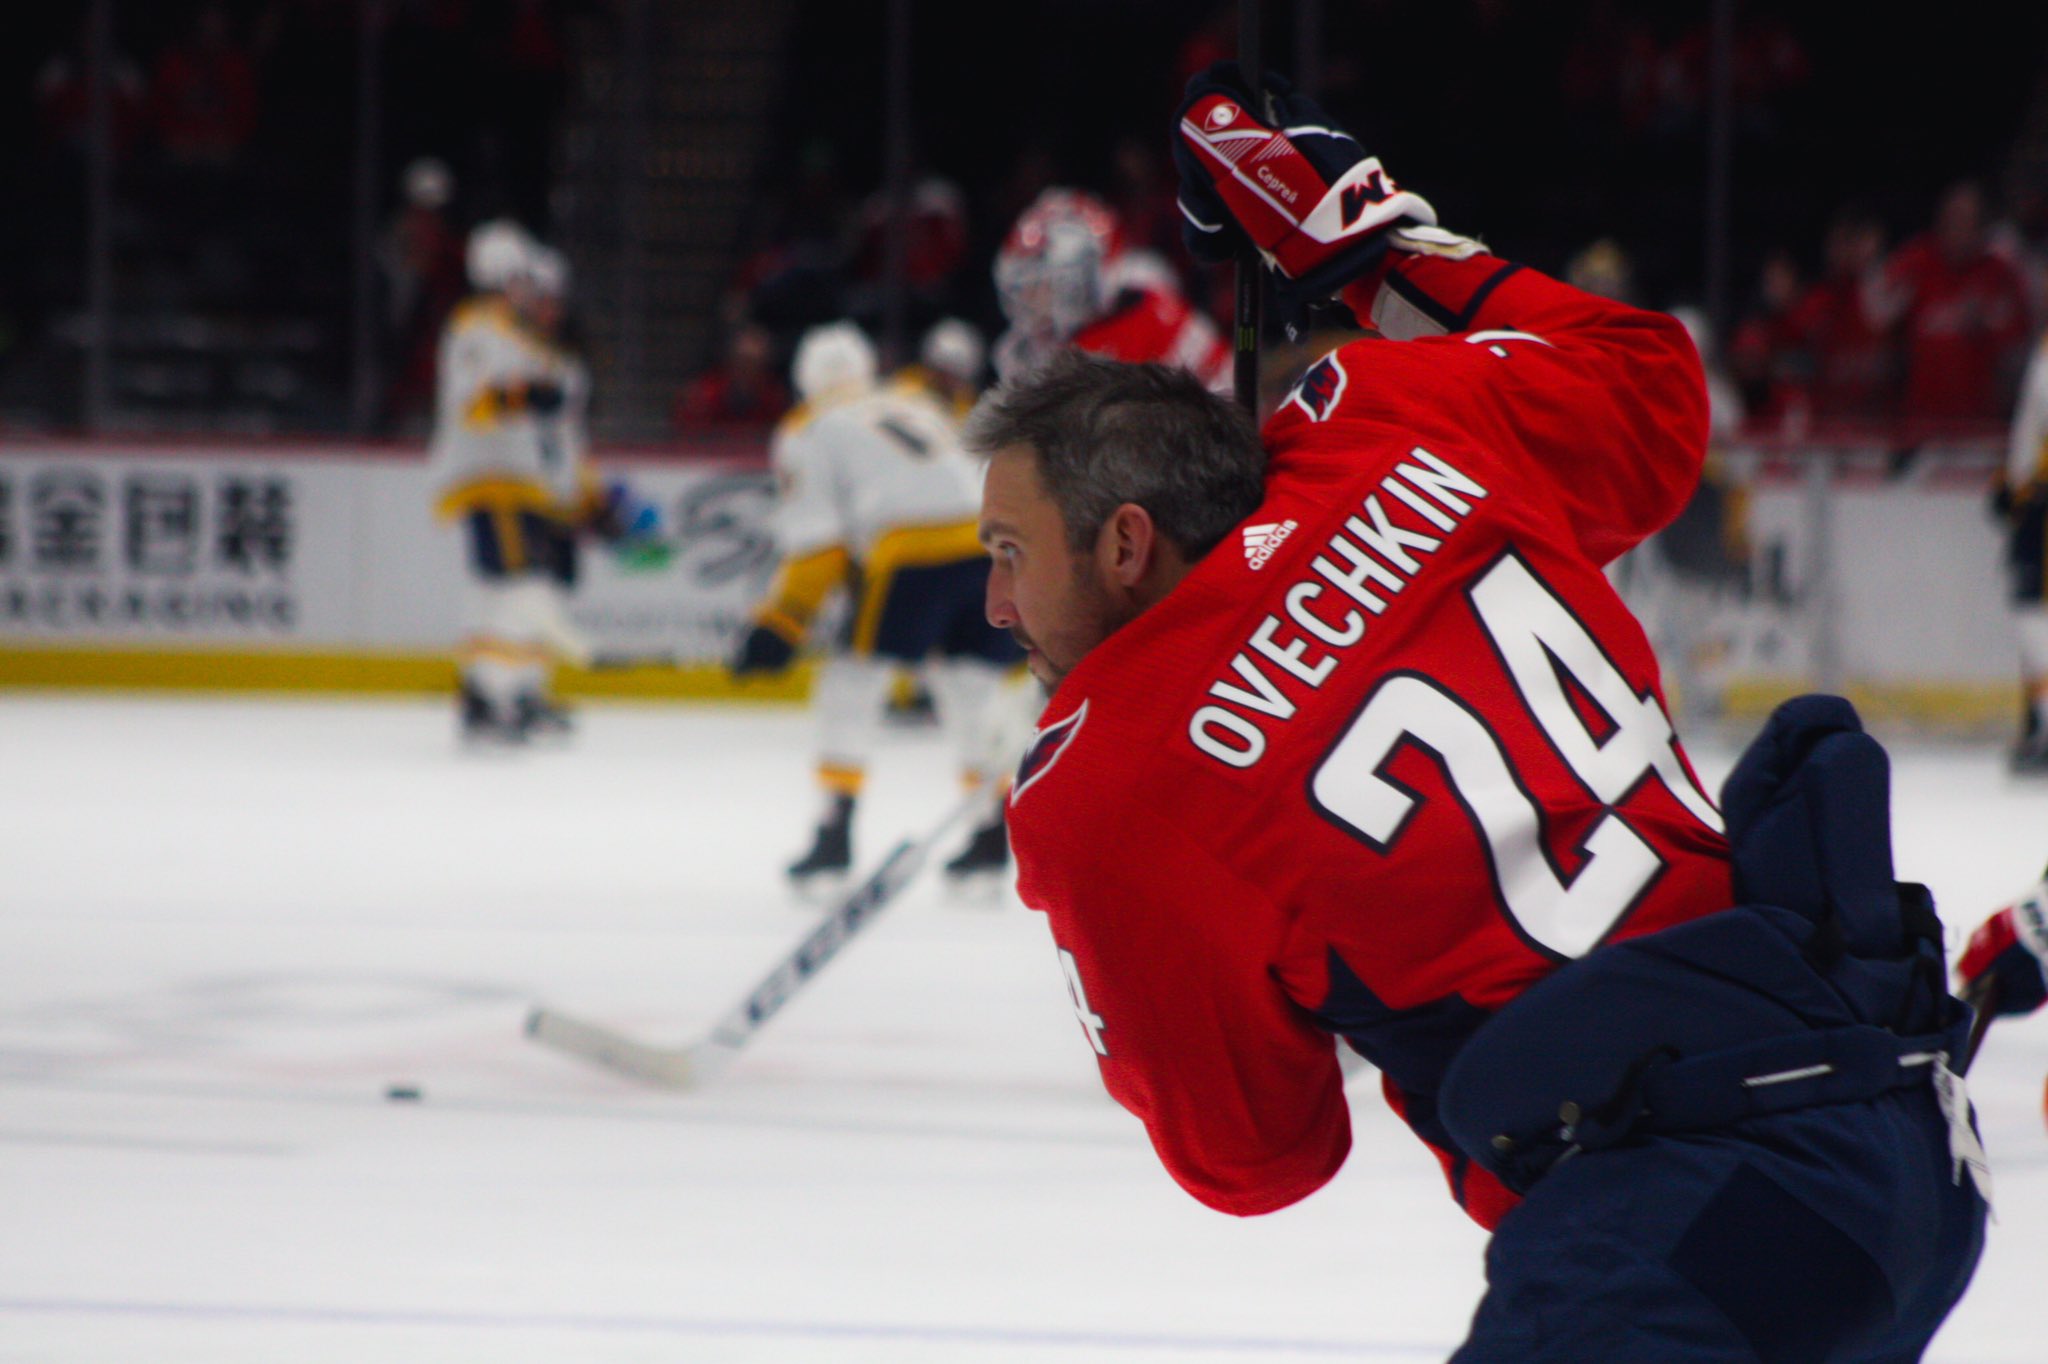 Alex Ovechkin wears No. 24, will auction jersey to benefit Bryant